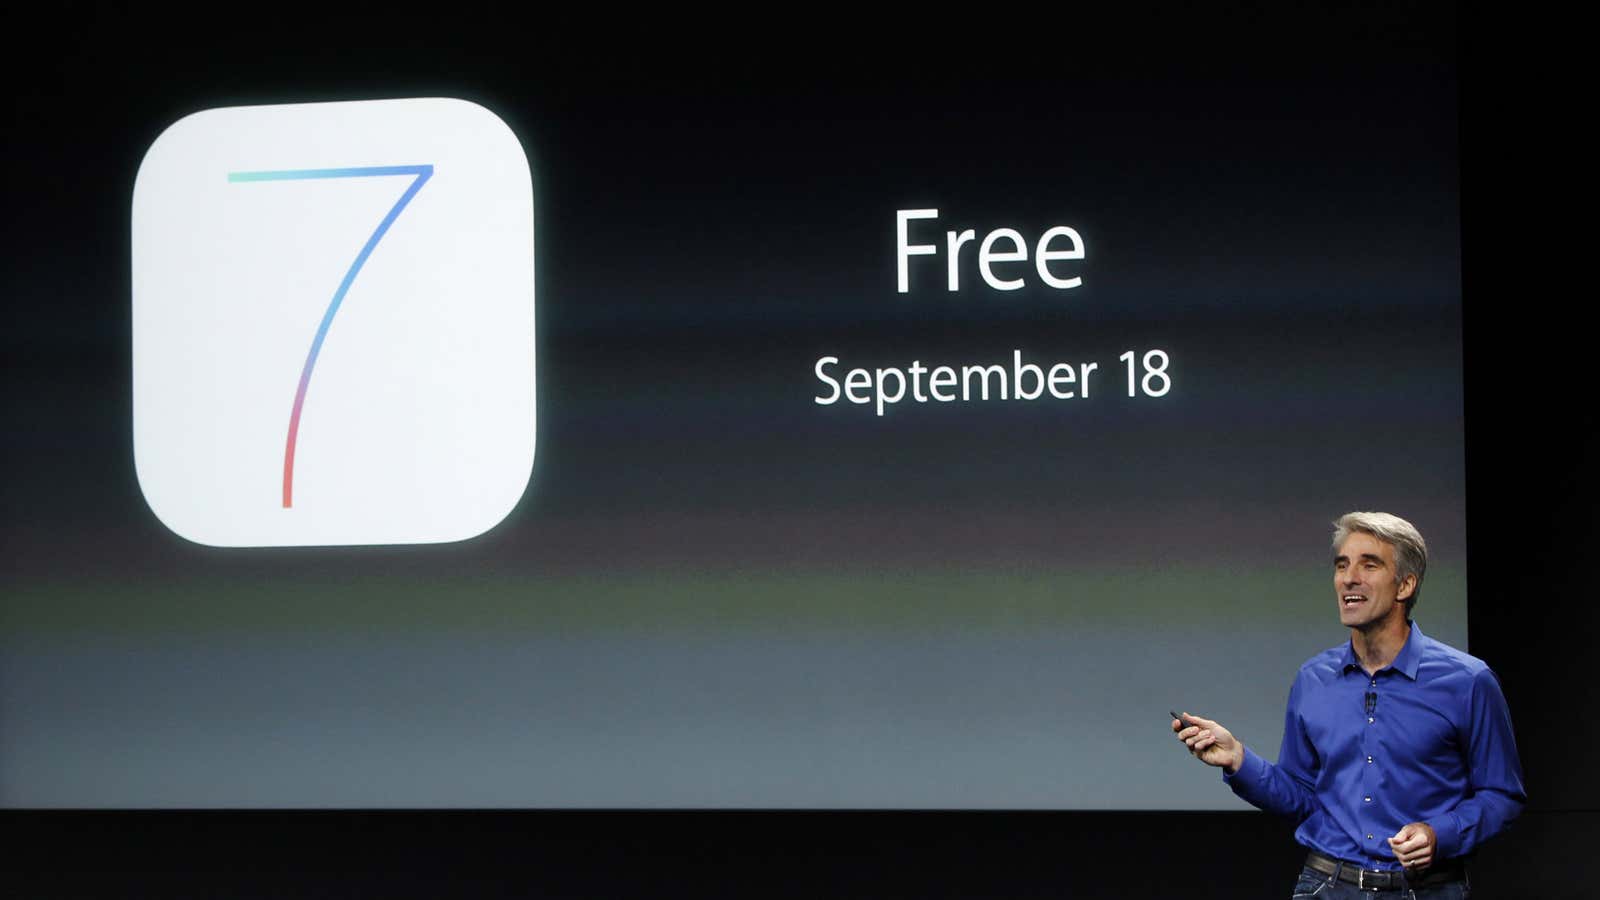 Apple’s Craig Federighi talks about iOS7 at the company’s event in Cupertino, California.